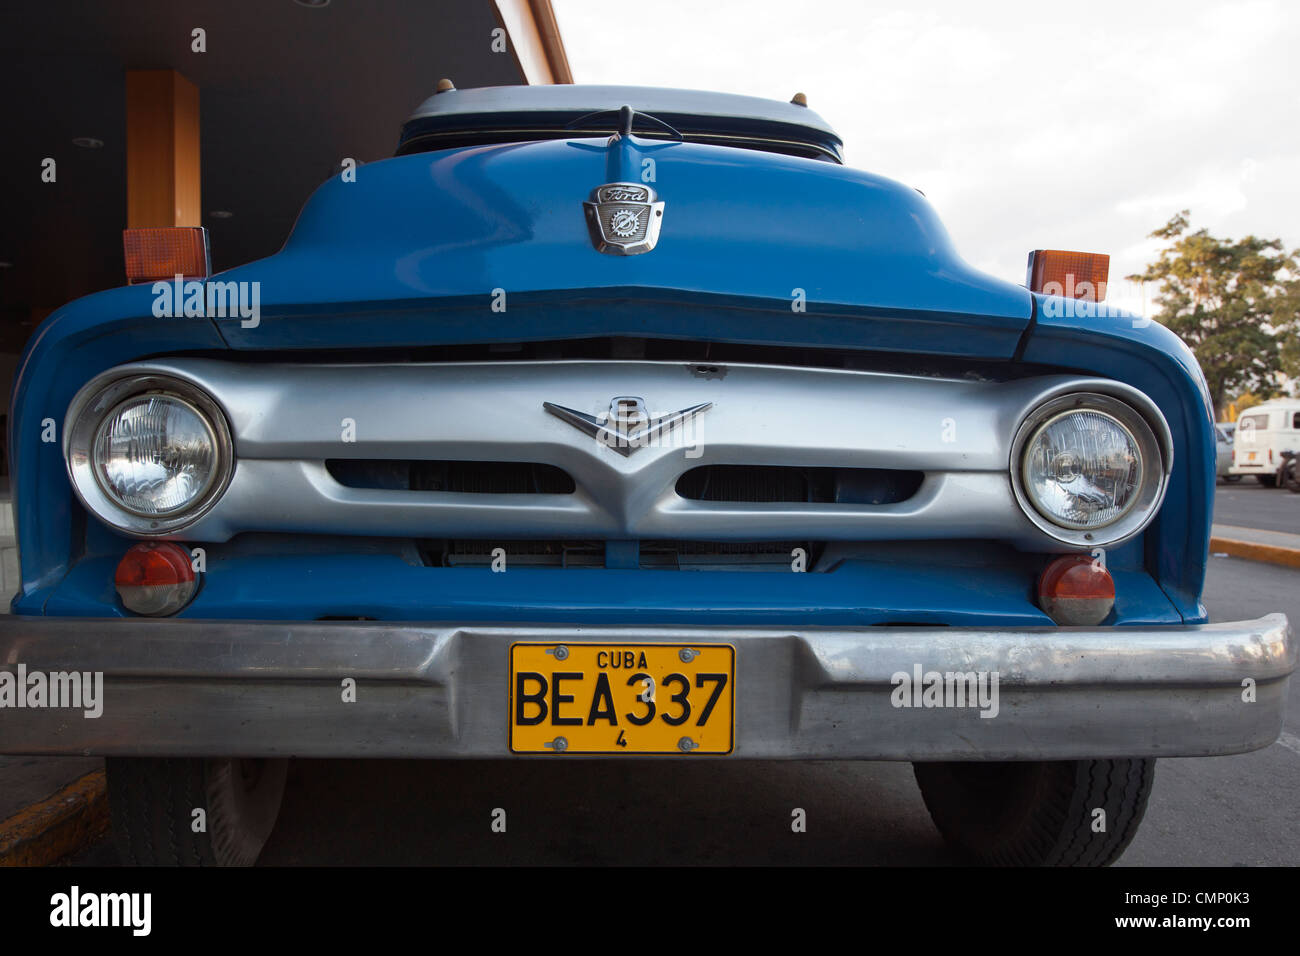 Old blue Ford truck Havana airport Cuba Stock Photo